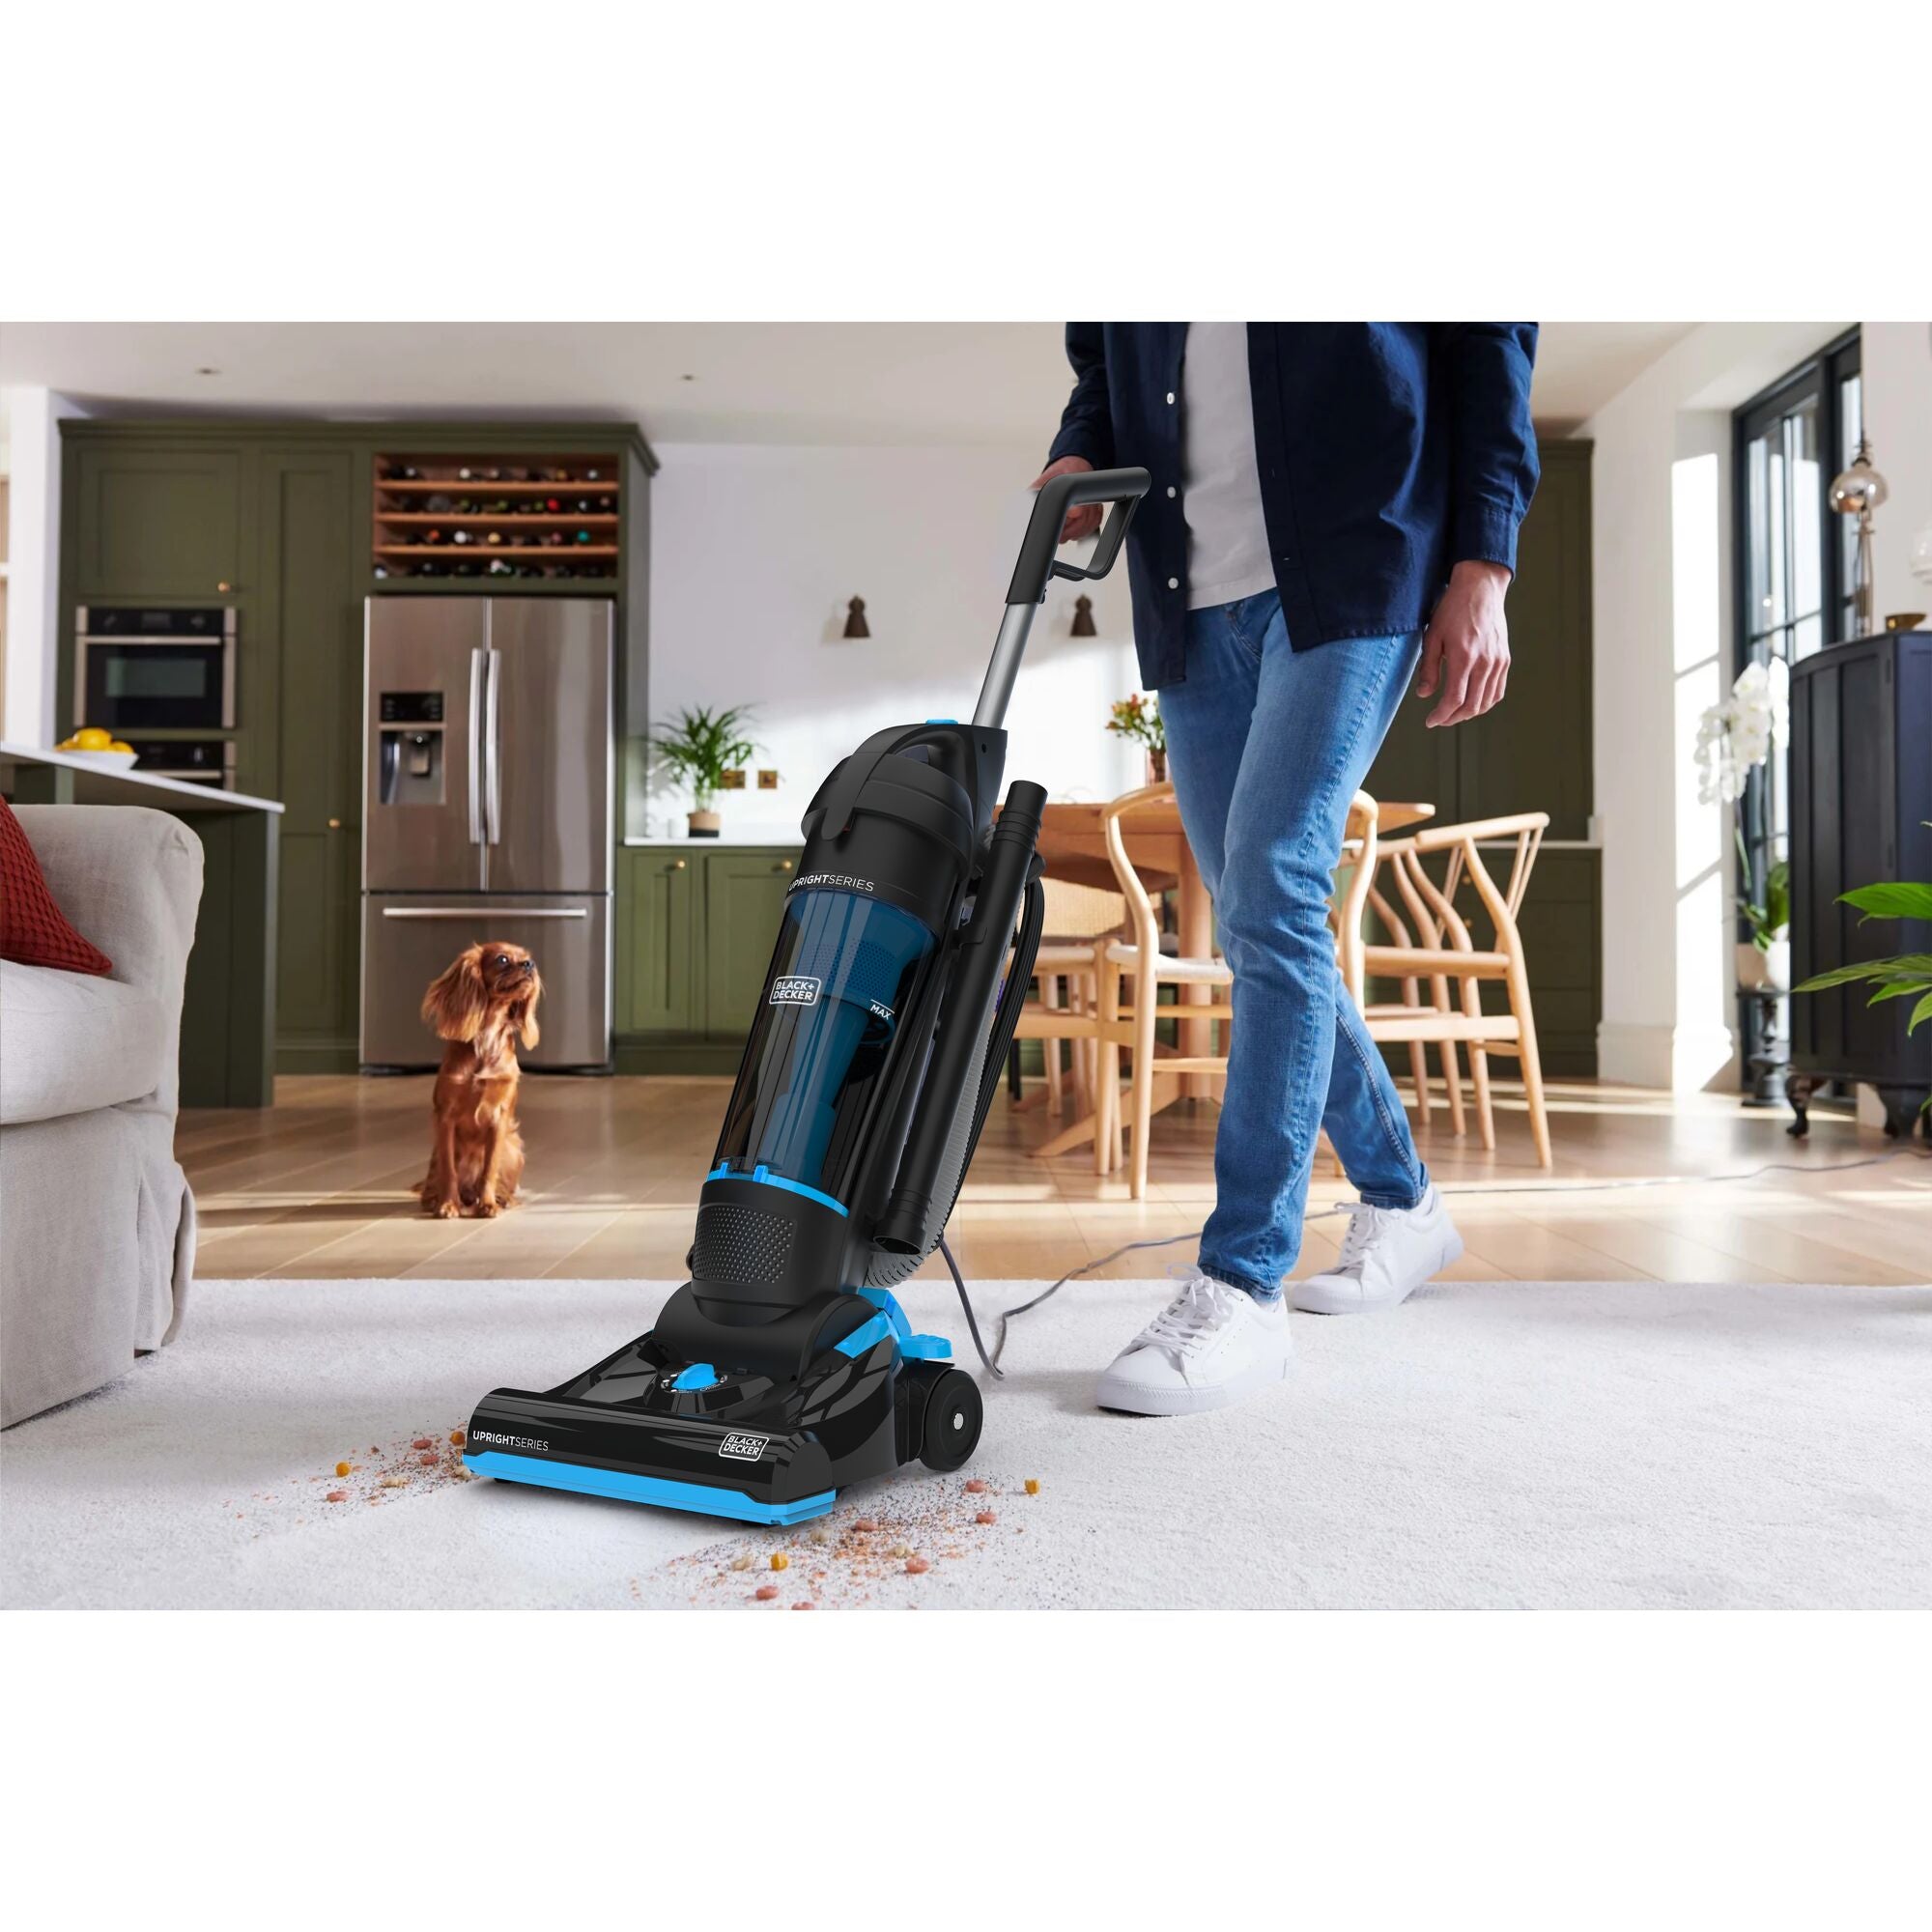 Uprightseries Multi-Surface Upright Vacuum With Hepa Filtration